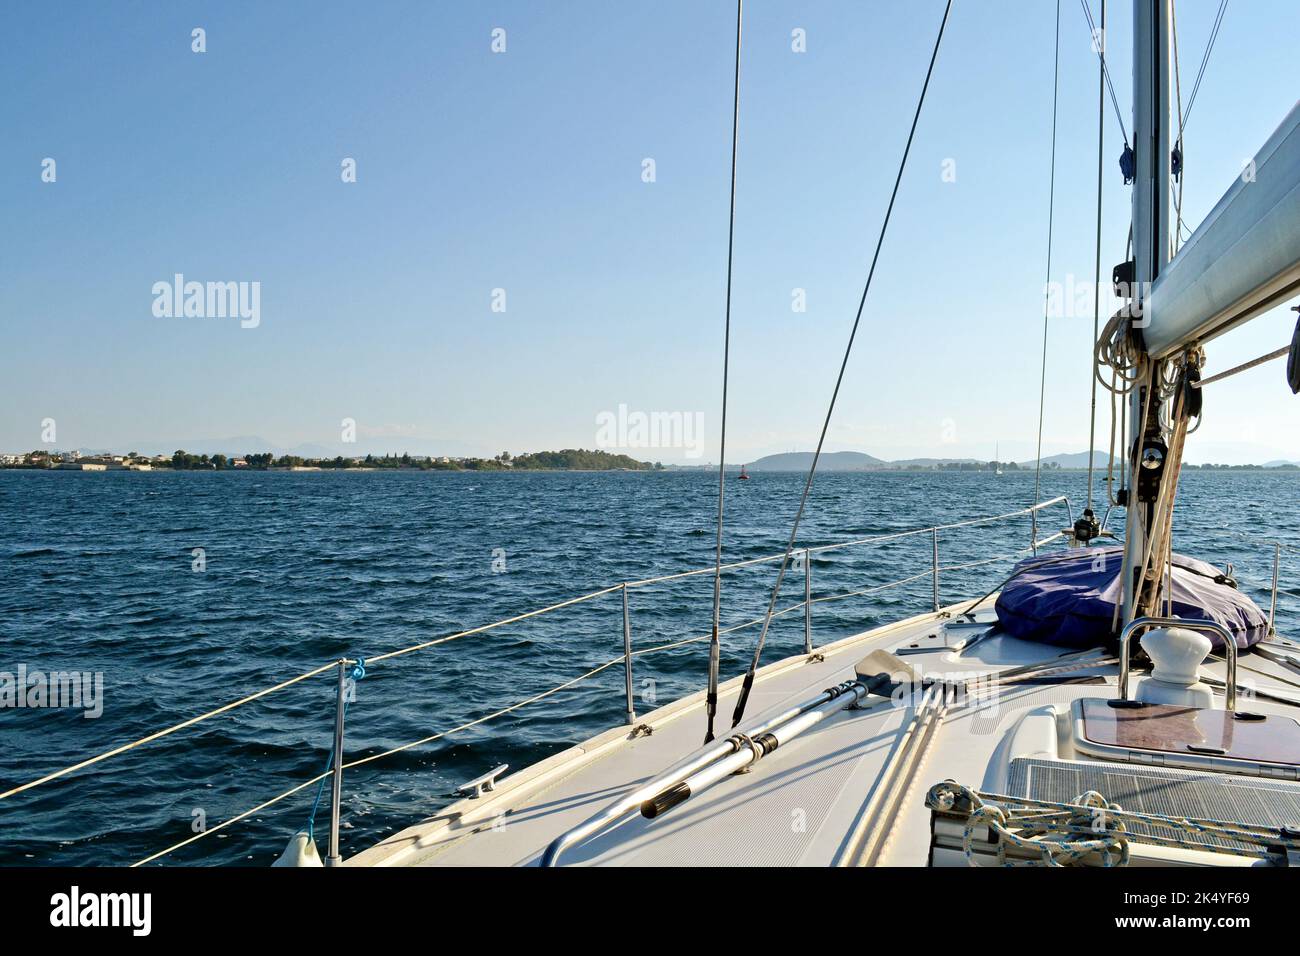 Entering Preveza by sailing boat. Stock Photo